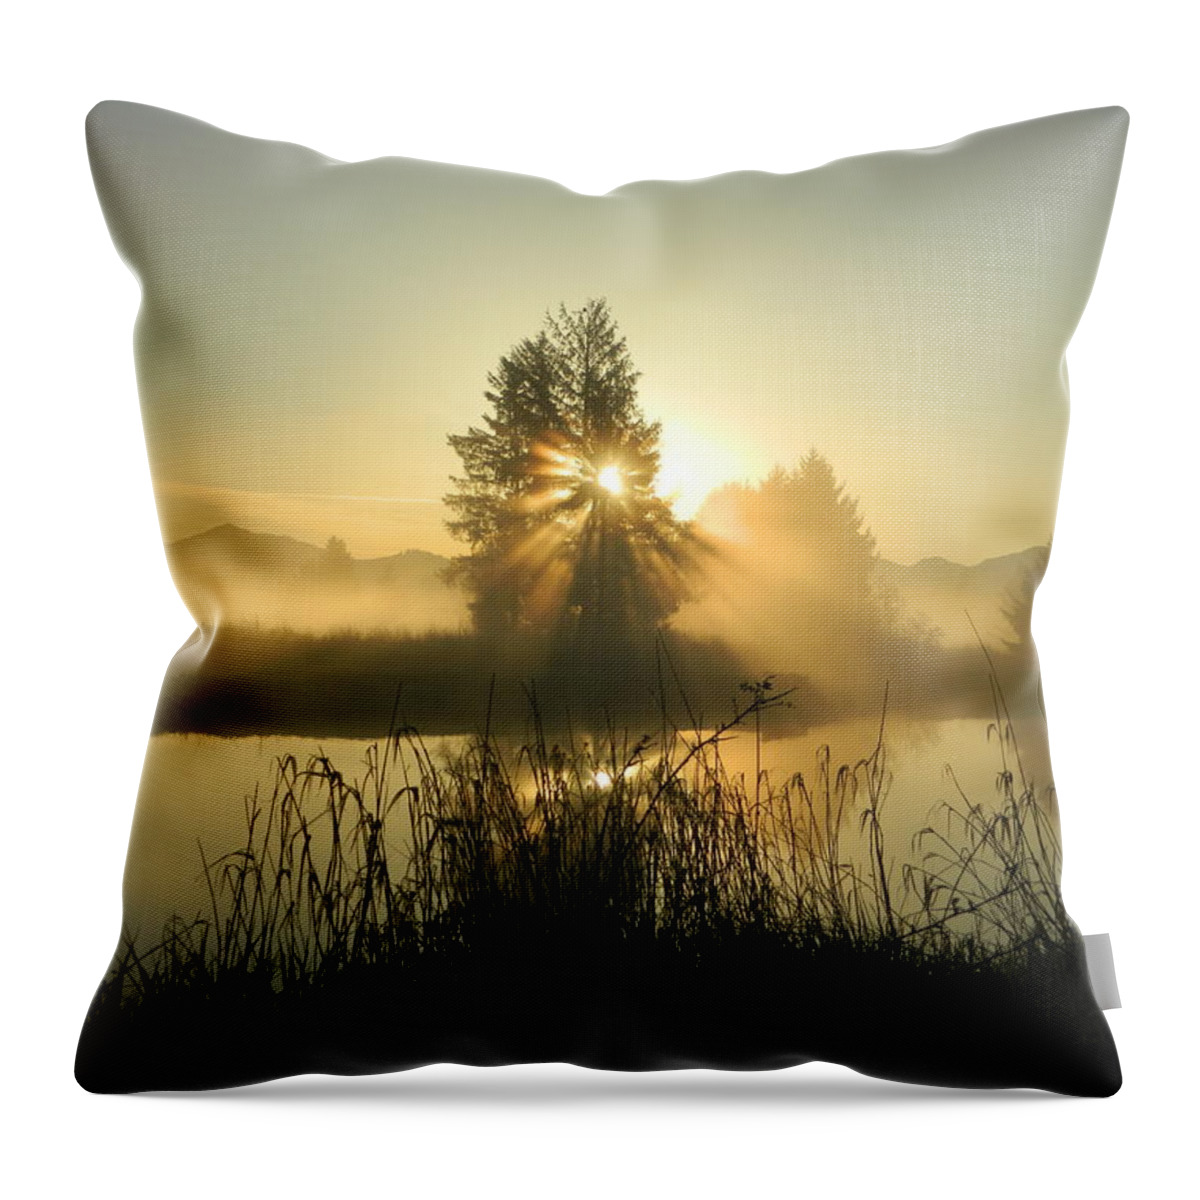 Sunrise Throw Pillow featuring the photograph Morning Bliss by Gallery Of Hope 